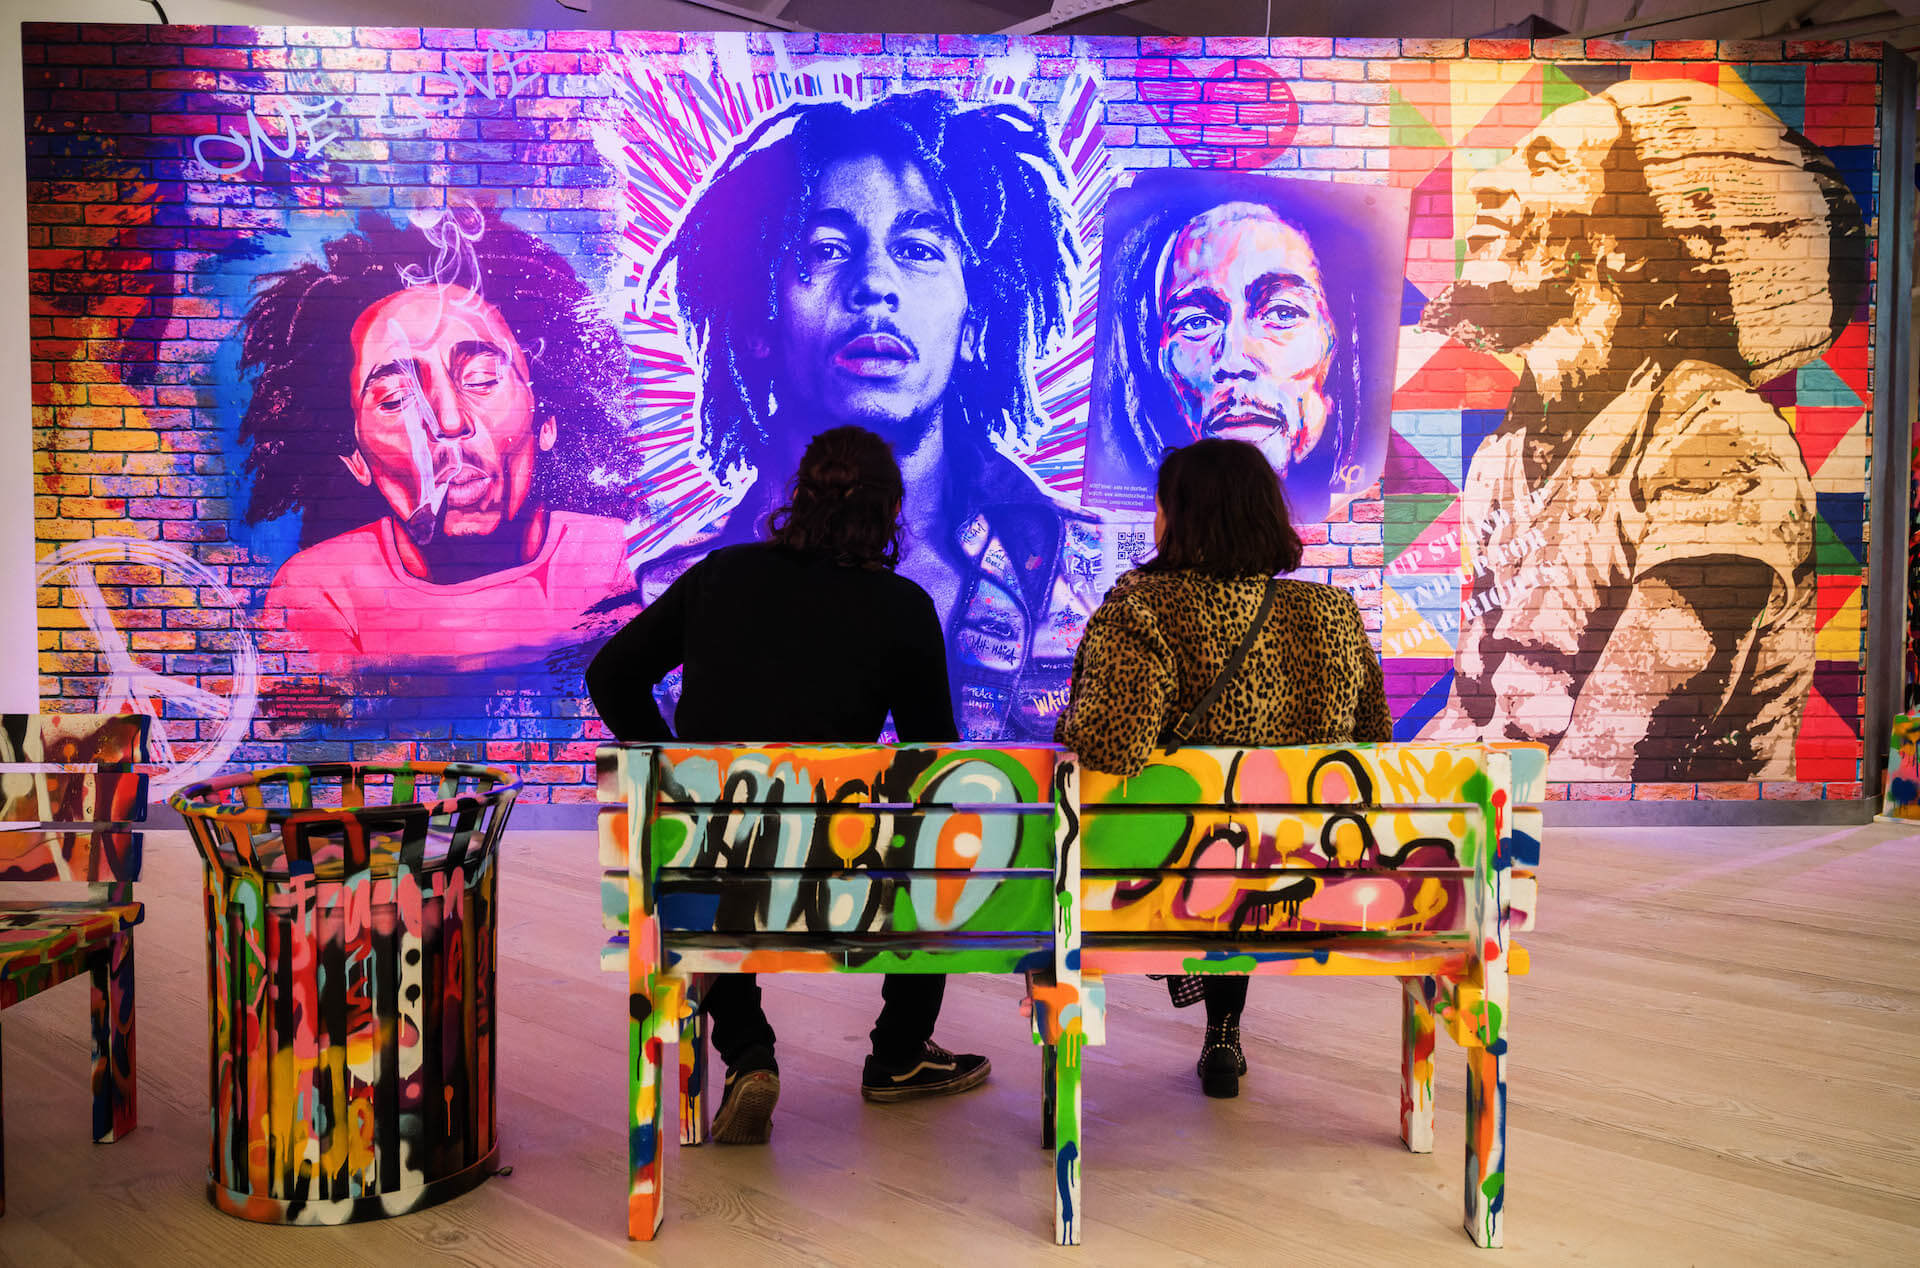 (c) Alex Brenner, Bob Marley One Love Experience, the Concrete Jungle Street Art Expo at Saatchi Gallery.